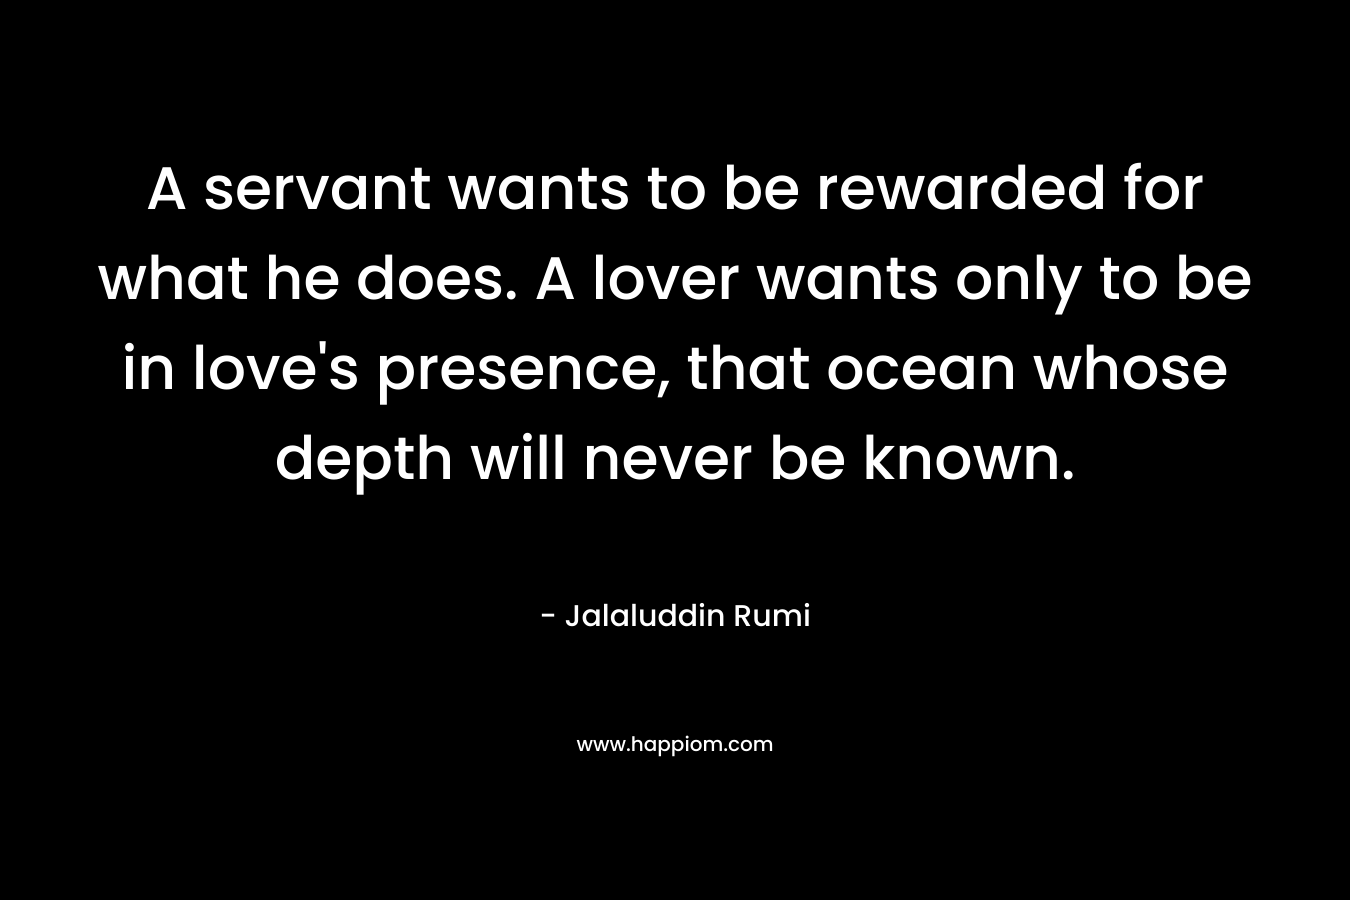 A servant wants to be rewarded for what he does. A lover wants only to be in love's presence, that ocean whose depth will never be known.